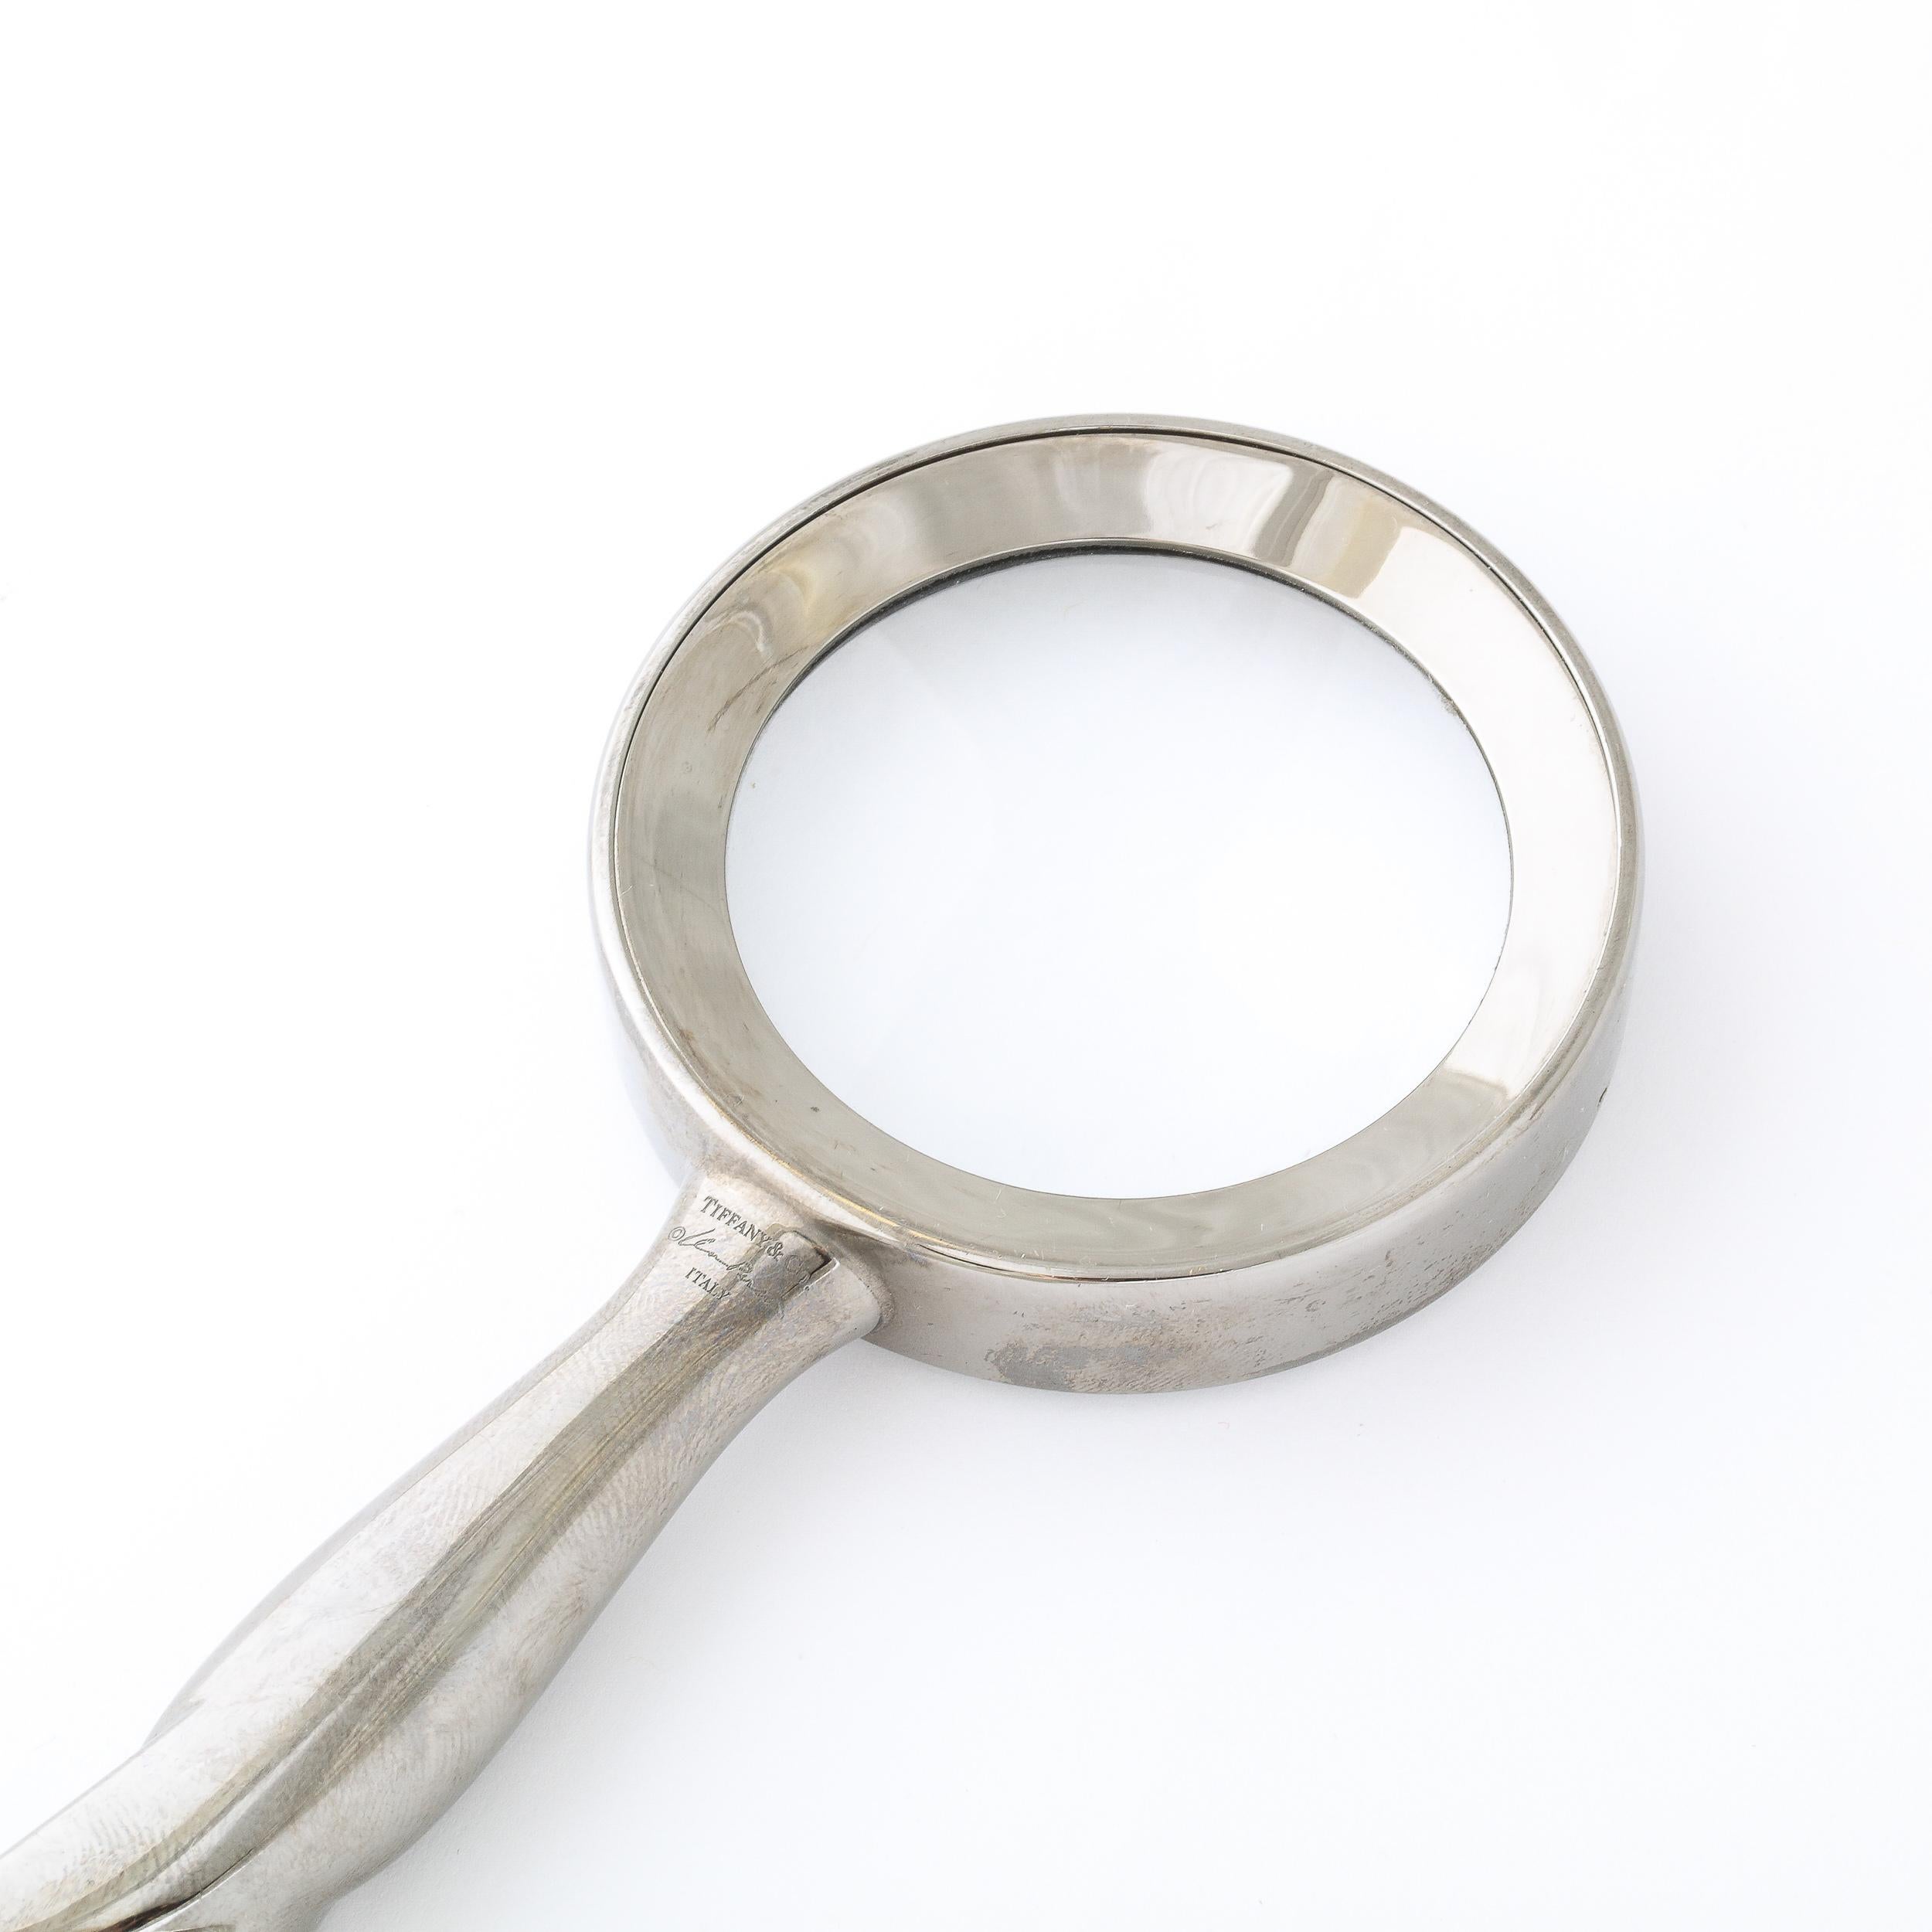 Late 20th Century Modernist Magnifying Glass in Gunmetal by Elsa Perretti for Tiffany and Co